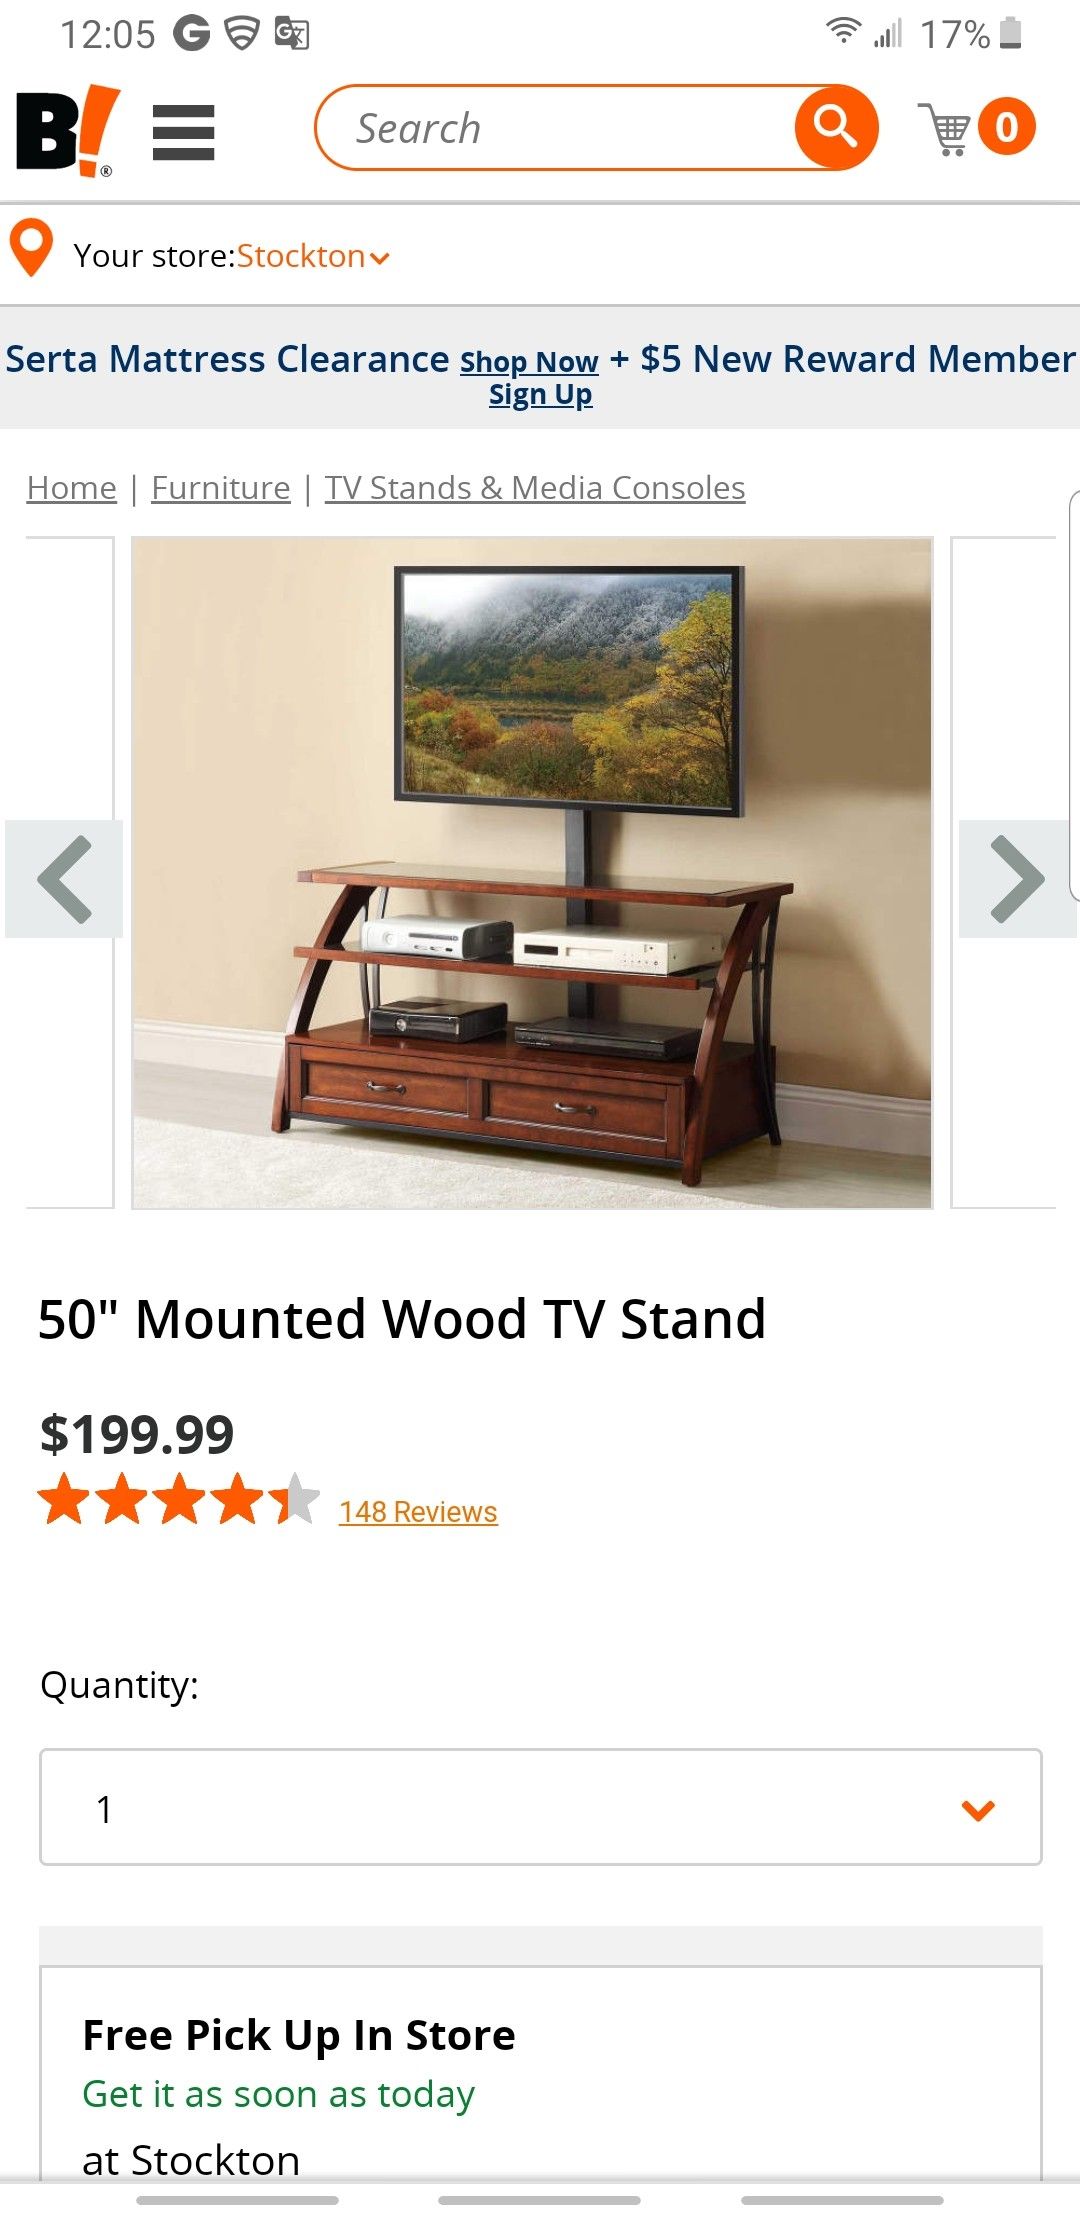 50" Mounted Wood TV Stand